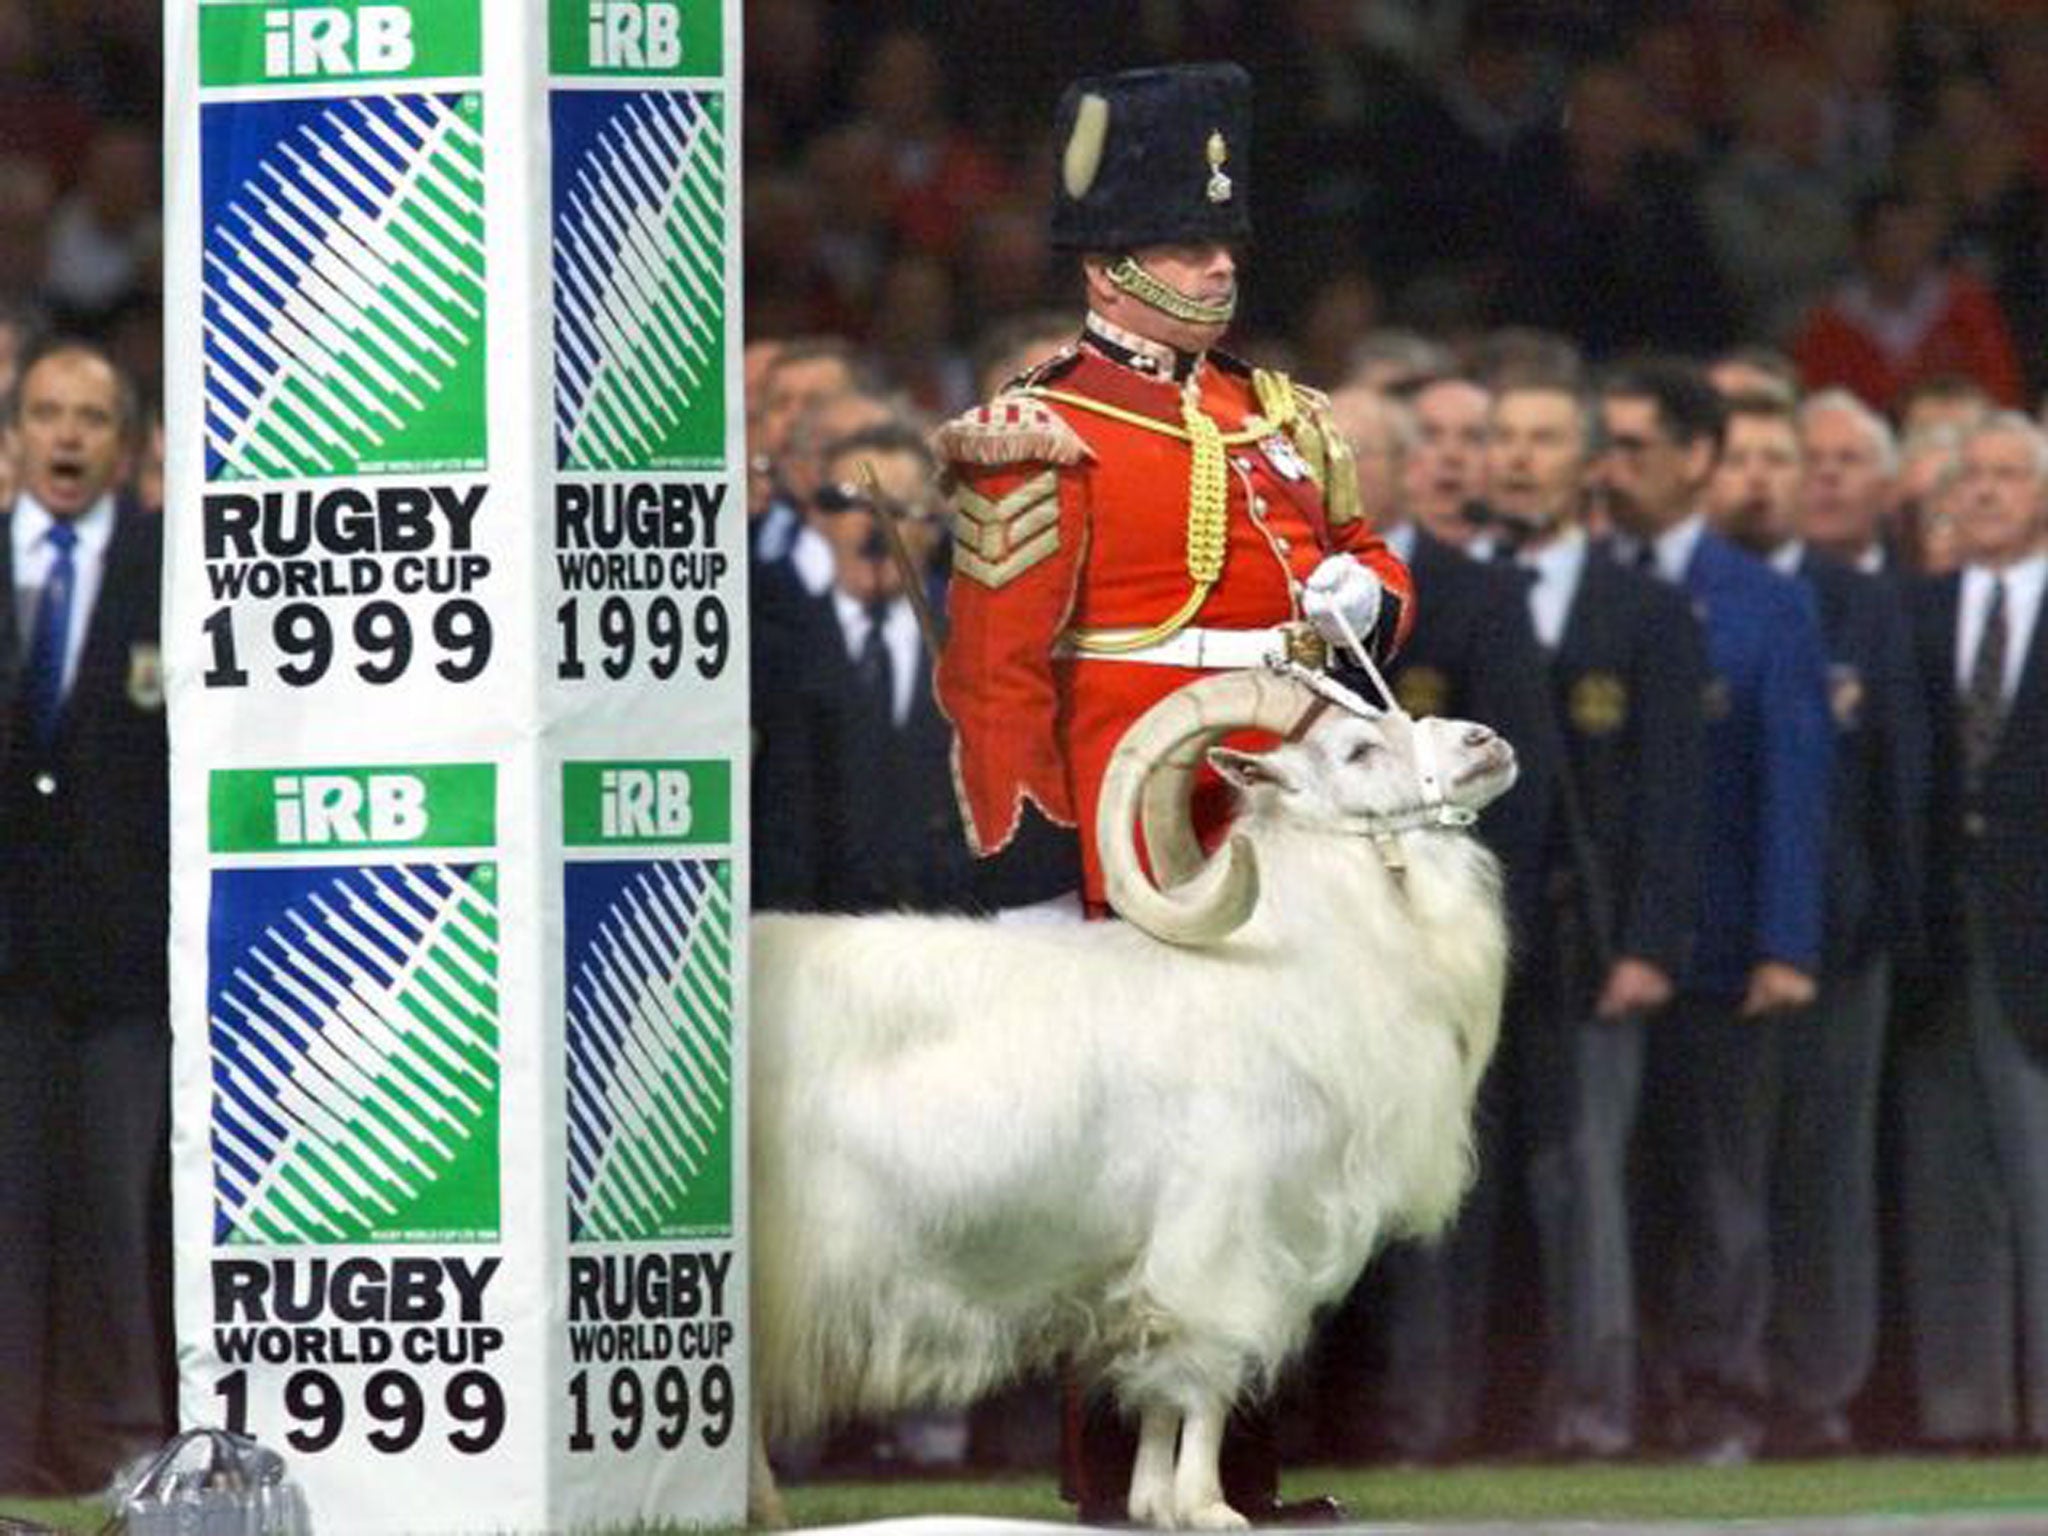 The goat mascot has a habit of upsetting the opposition